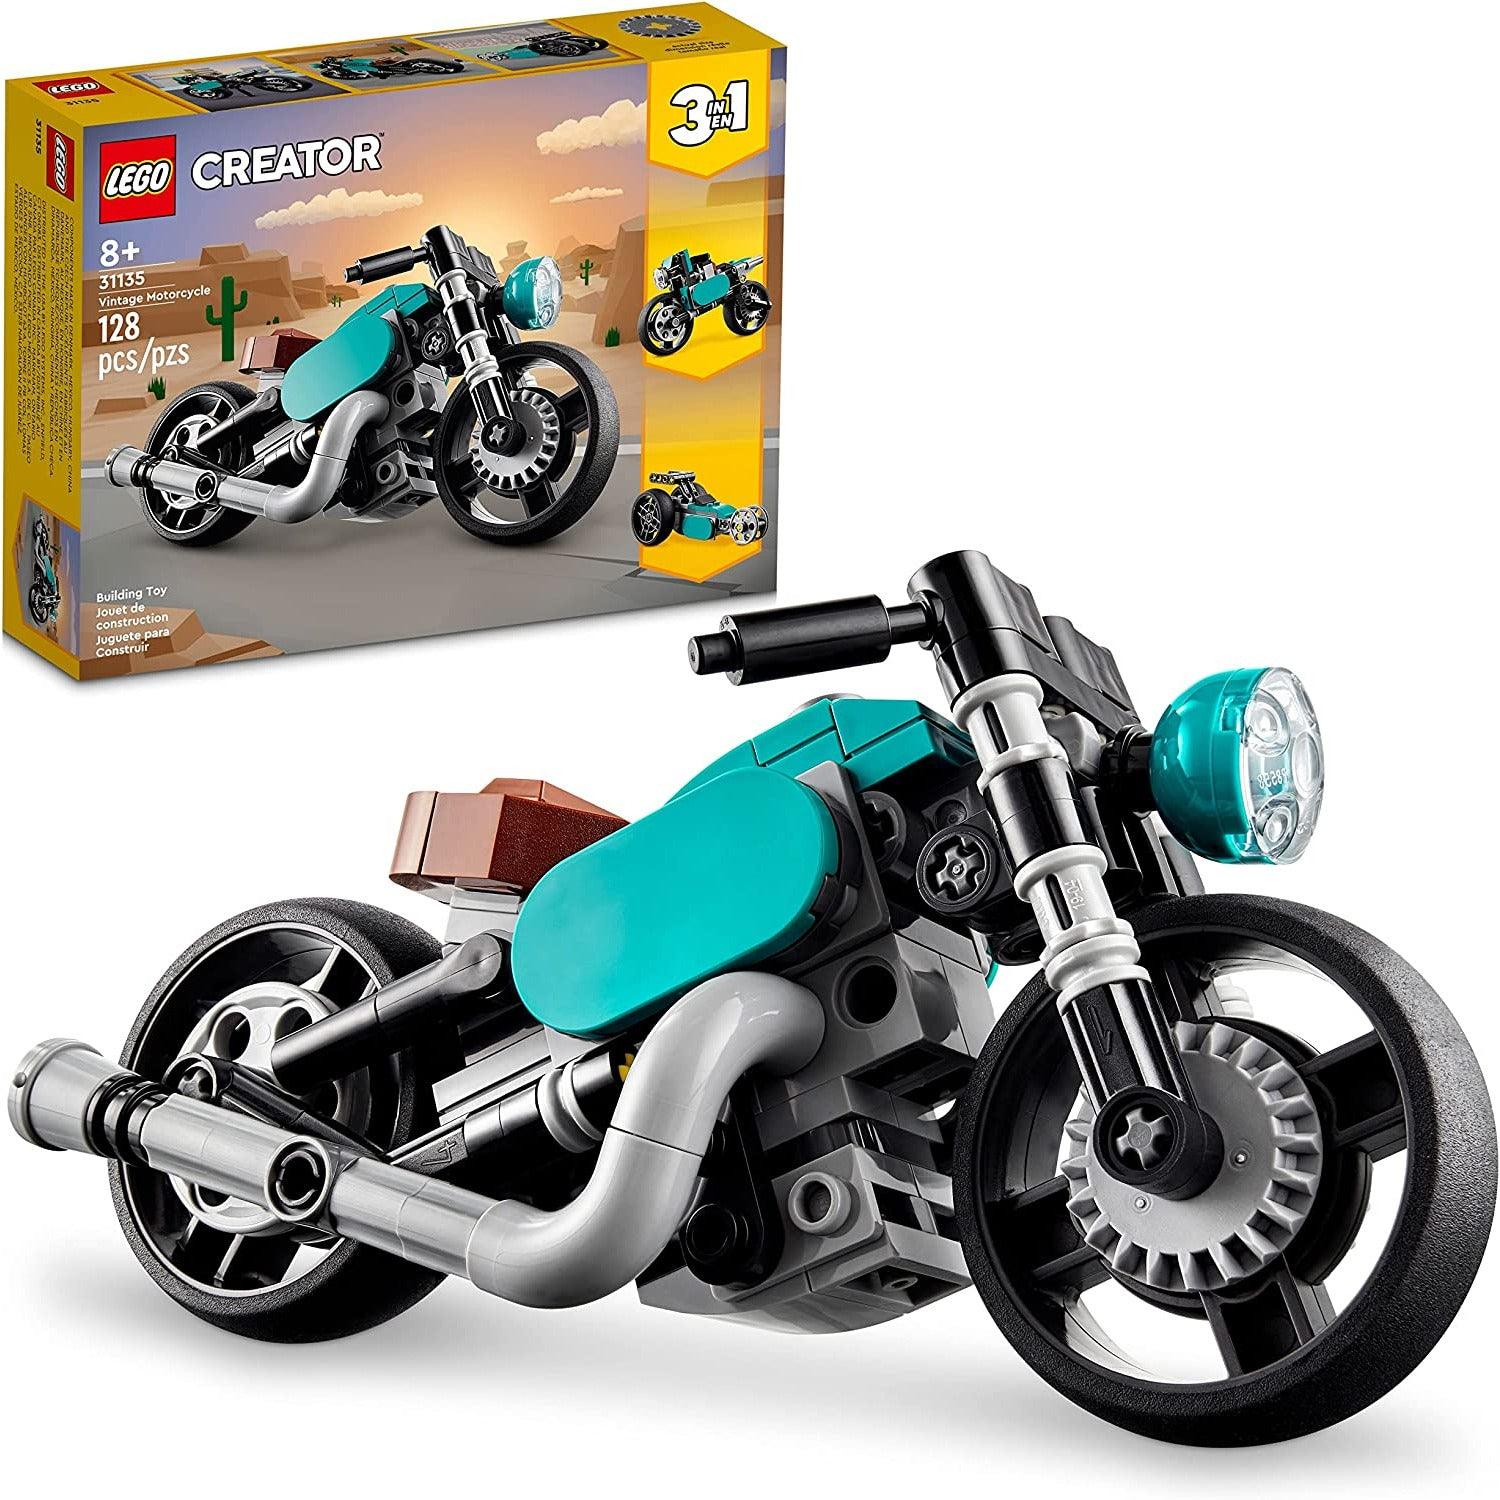 LEGO 31135 Creator 3 in 1 Vintage Motorcycle Set , Classic Motorcycle Toy to Street Bike to Dragster Car